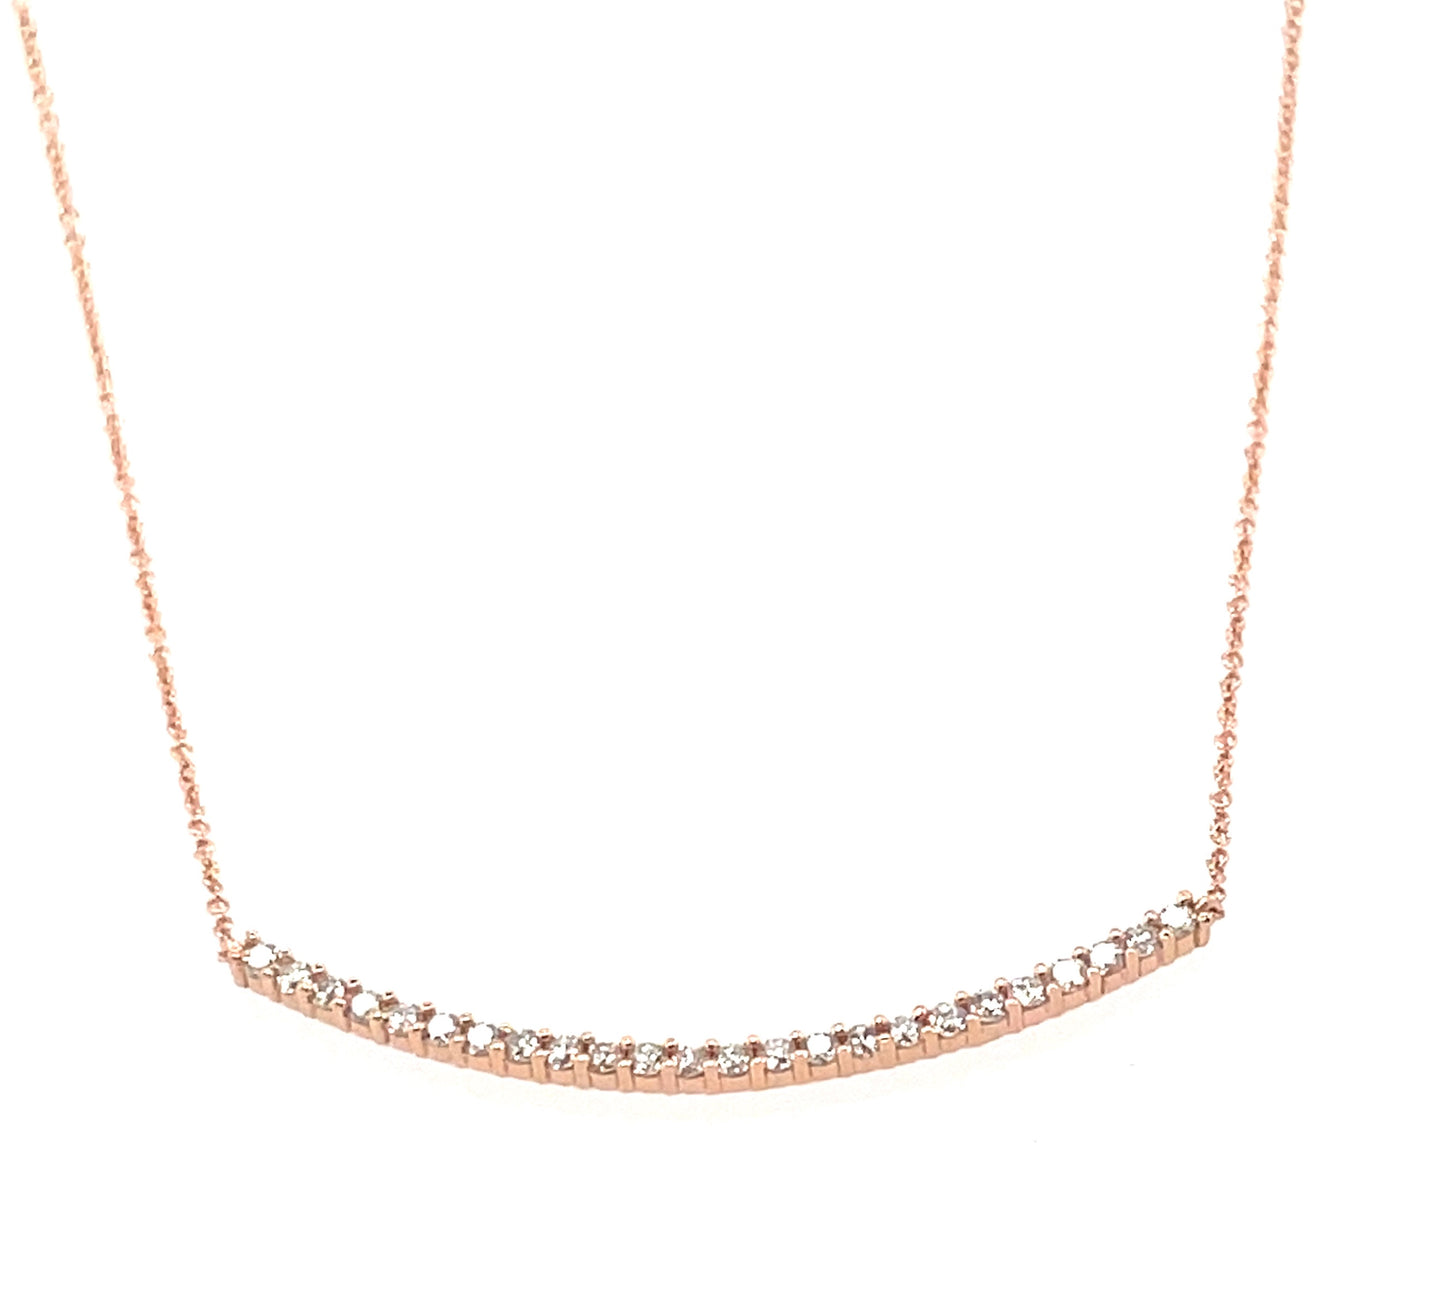 Our diamond bar necklace is the perfect everyday necklace. Available in 14k yellow & rose gold.